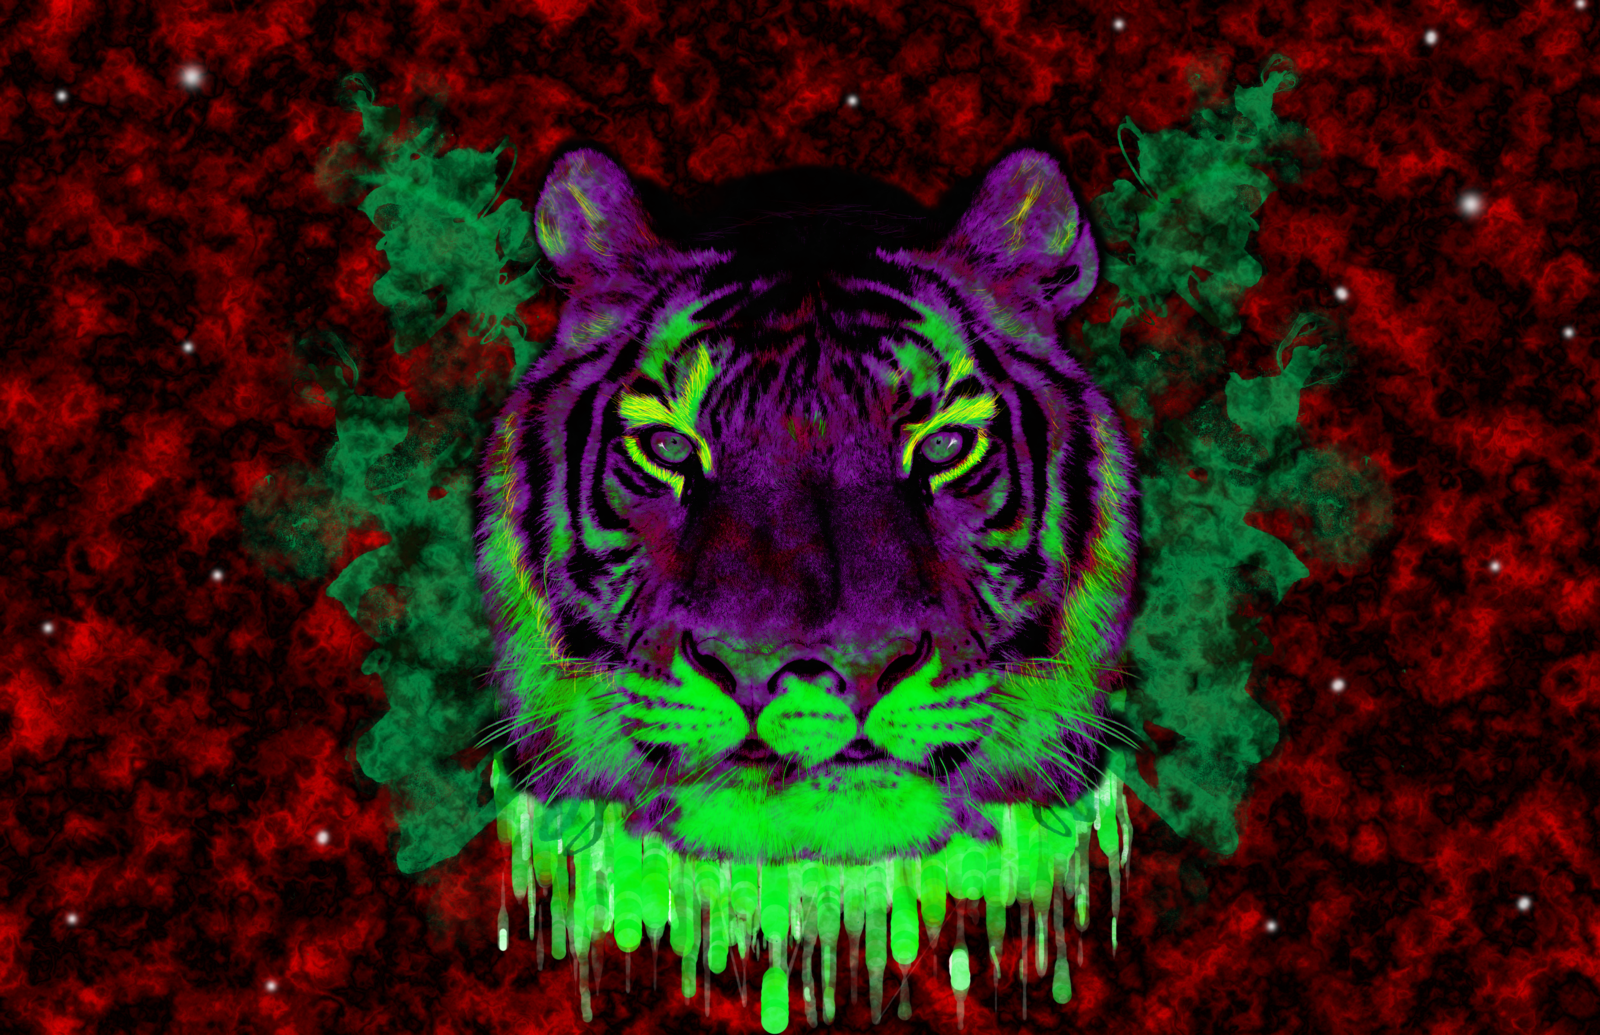 For Trippy Lion Displaying Image